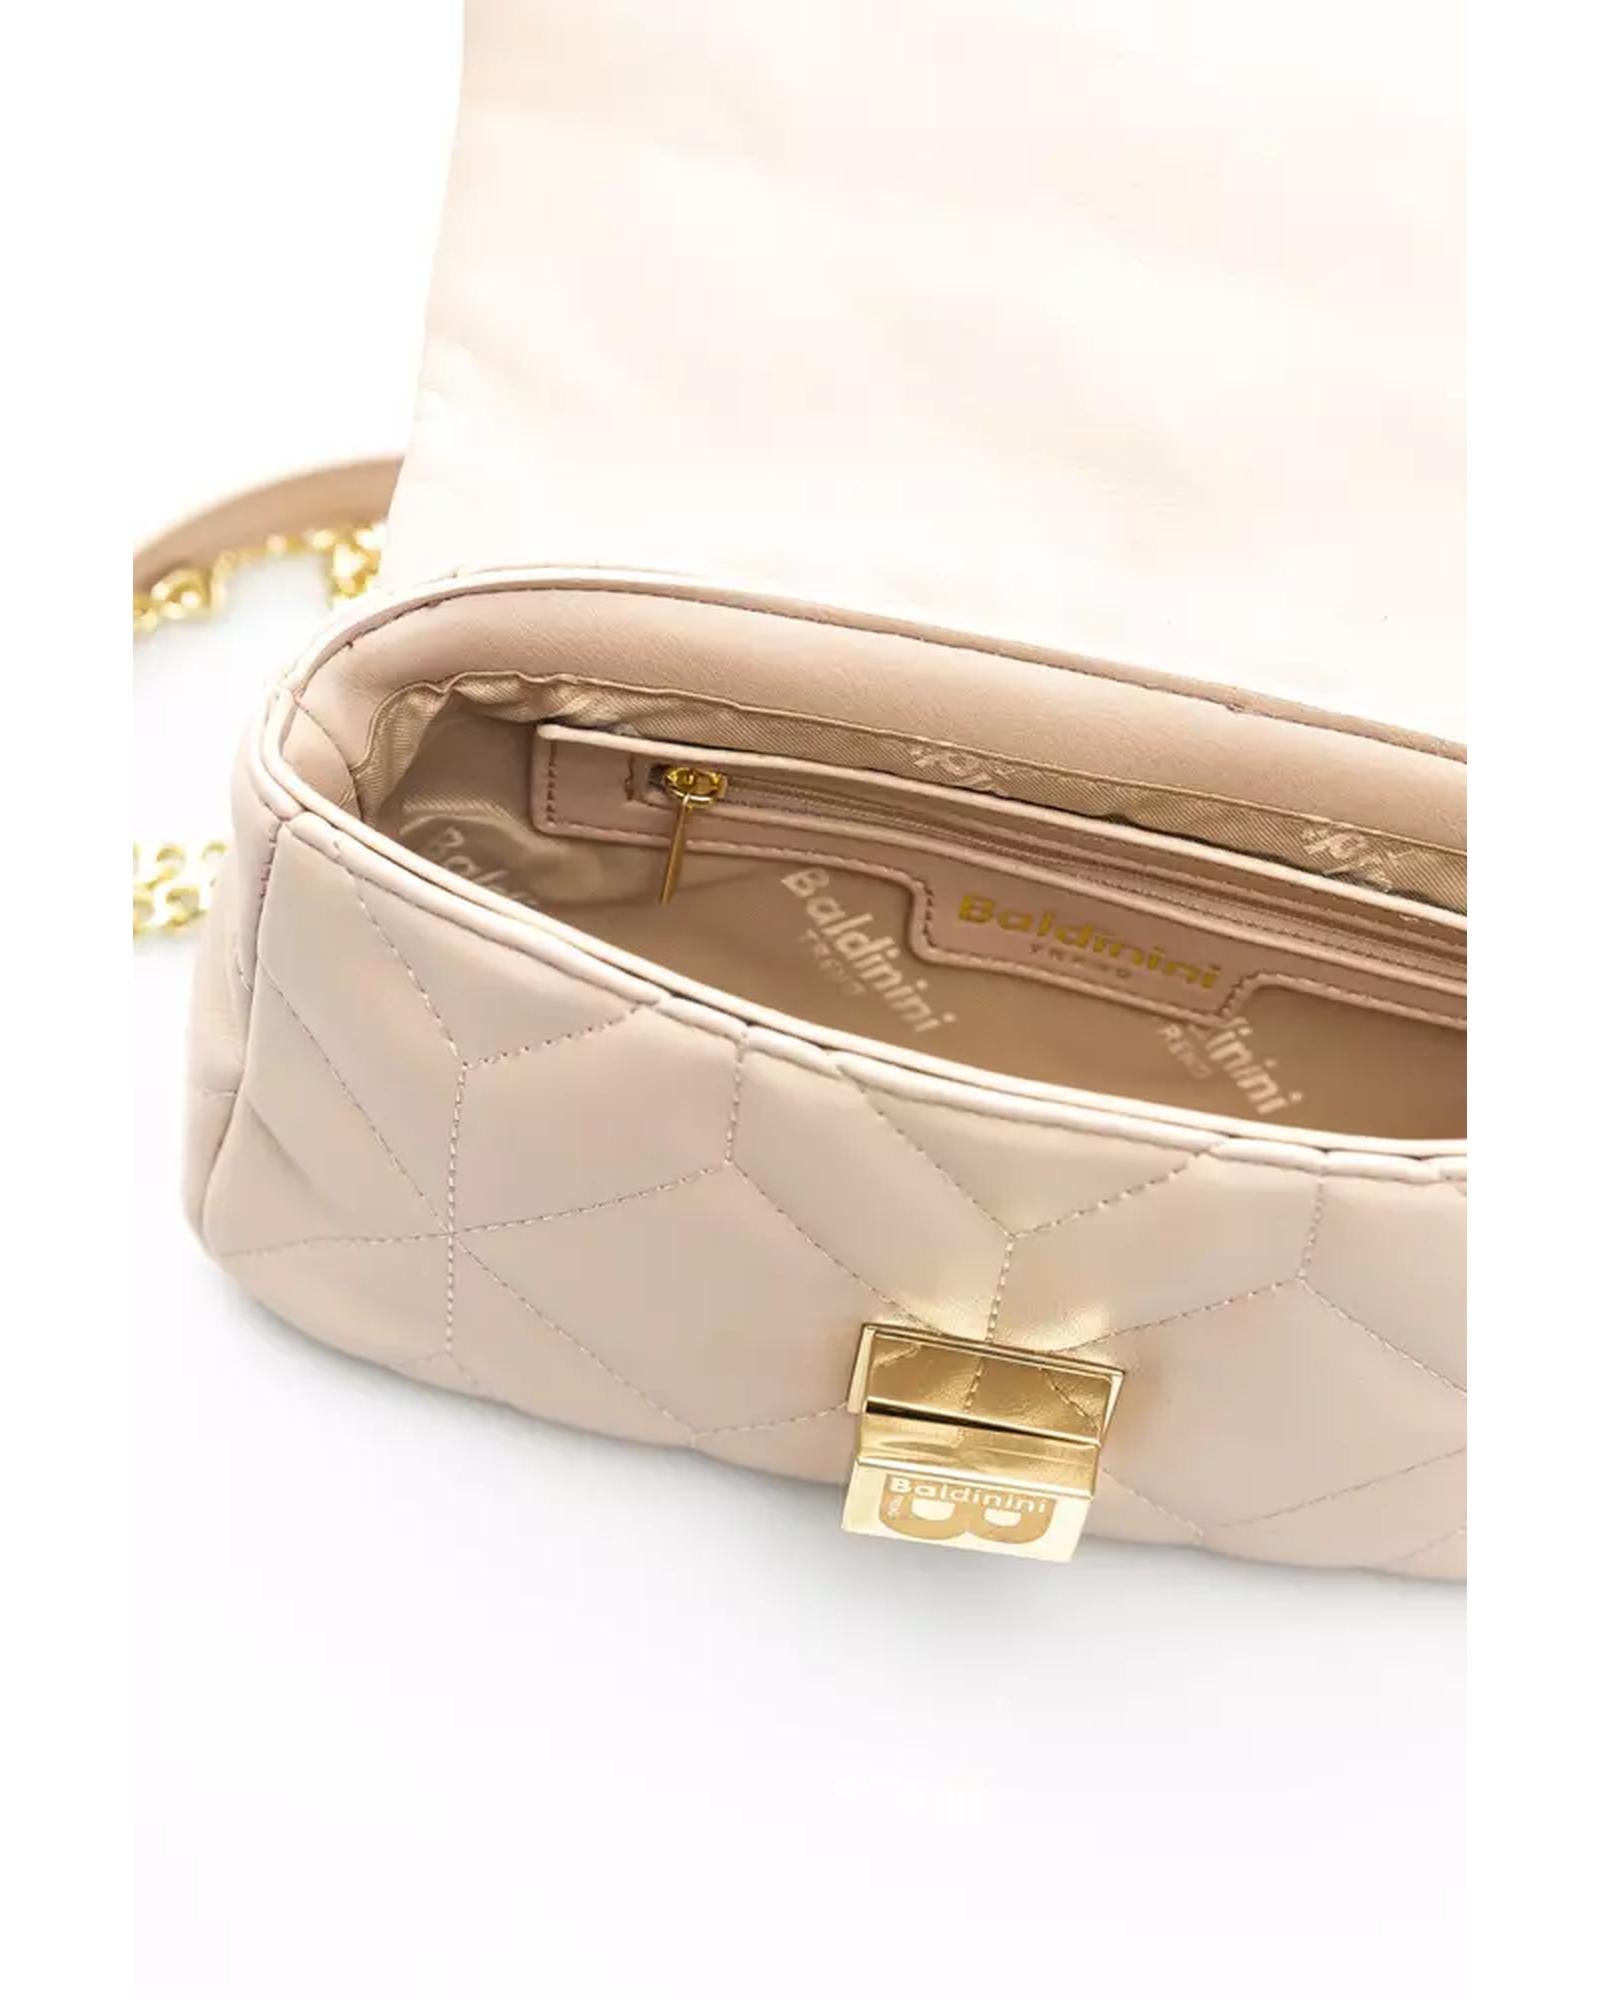 Flap Closure Leather Shoulder Bag with Internal Compartments One Size Women